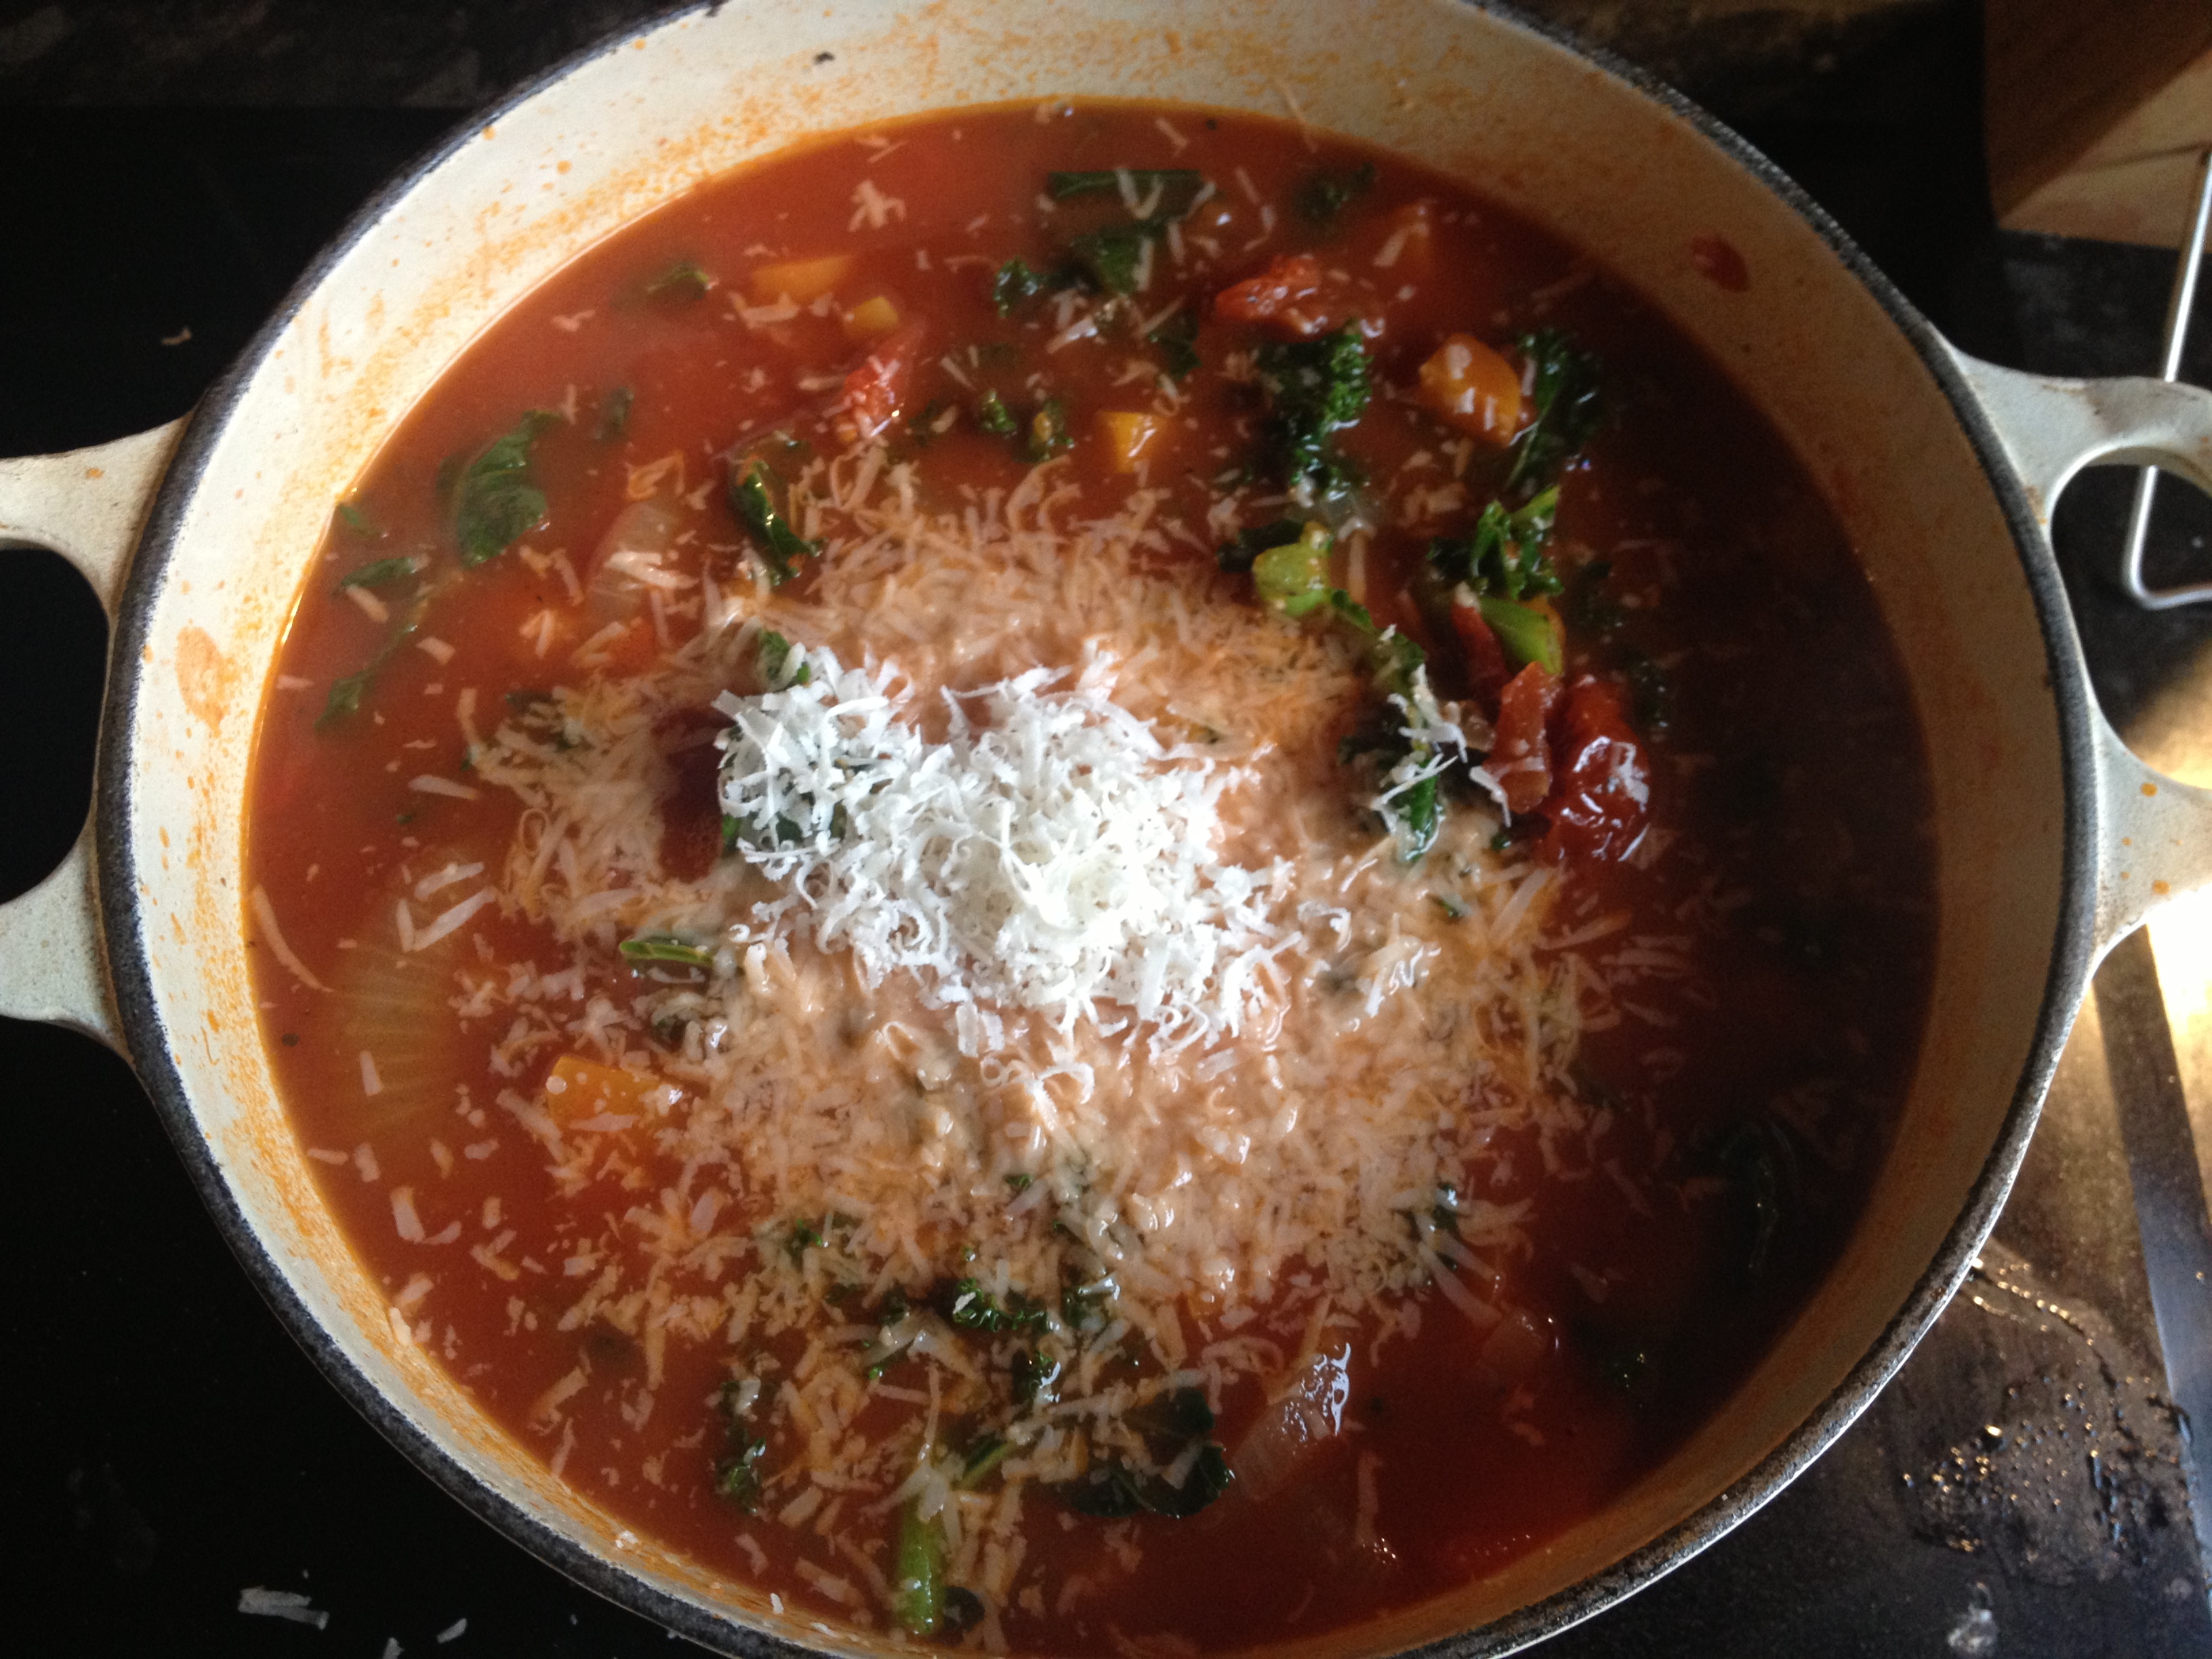 www.hoylesfitness.com, weight loss, fat loss, tomato sauce, paleo, low carb, Meatballs in Tomato and Vegetable Sauce